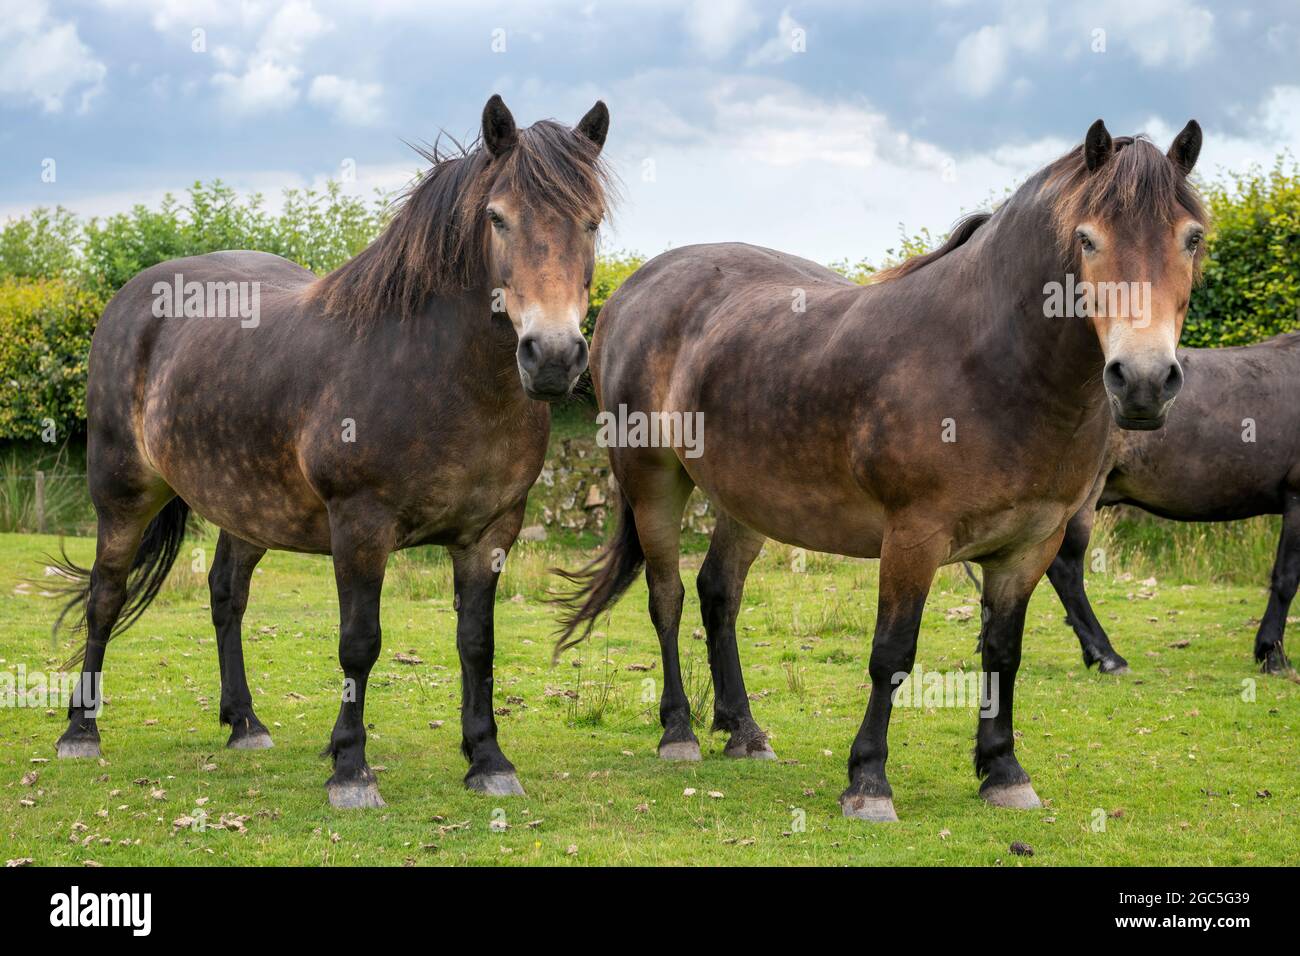 The Exmoor pony is a breed that is native to the British Isles. They roam the moorland of Exmoor in Devon and Somerset, southwest England, as semi-fer Stock Photo